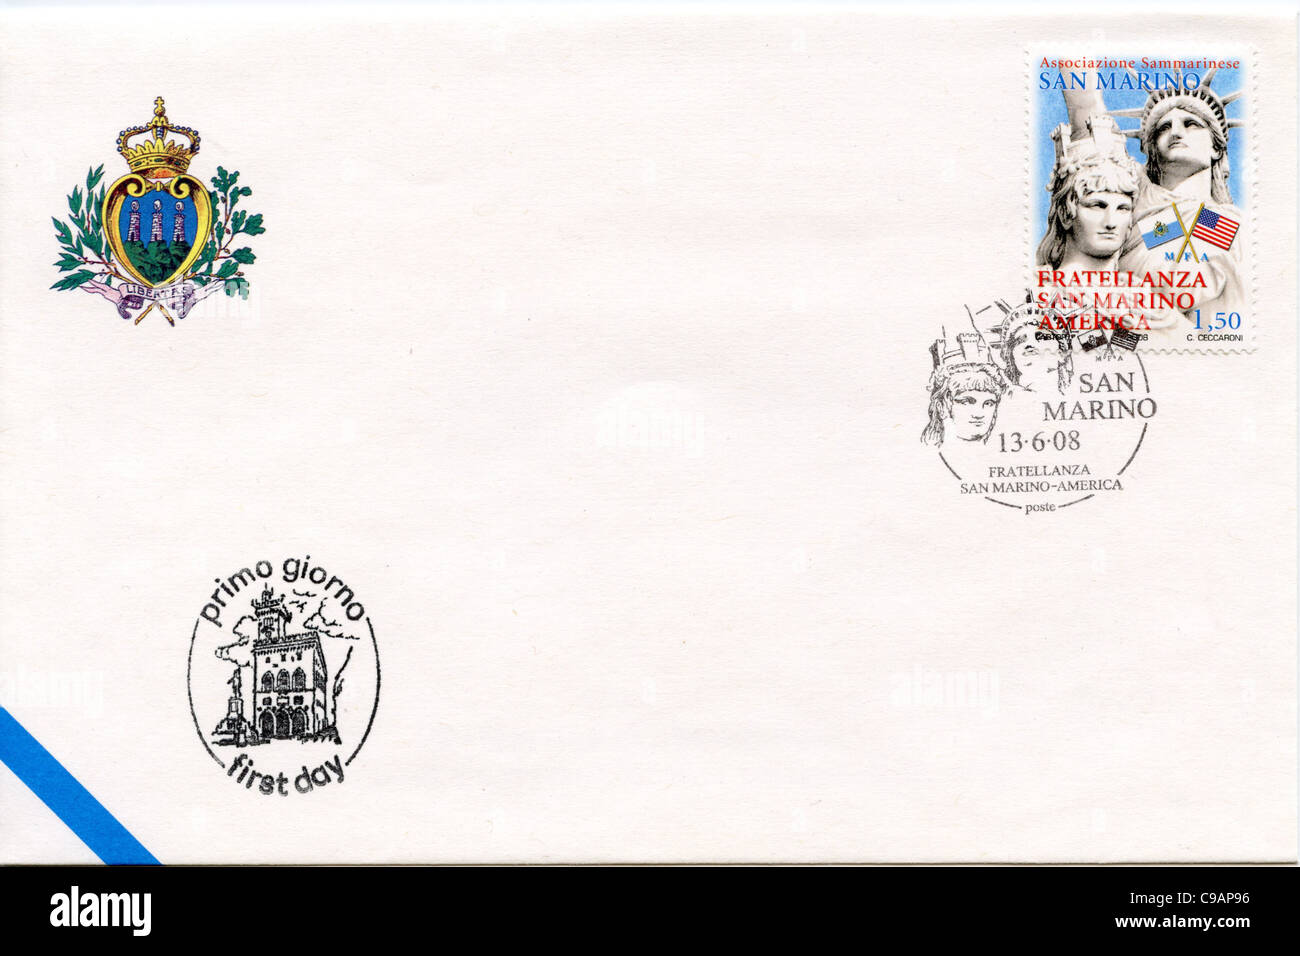 San Marino postage stamp and First Day Cover Stock Photo